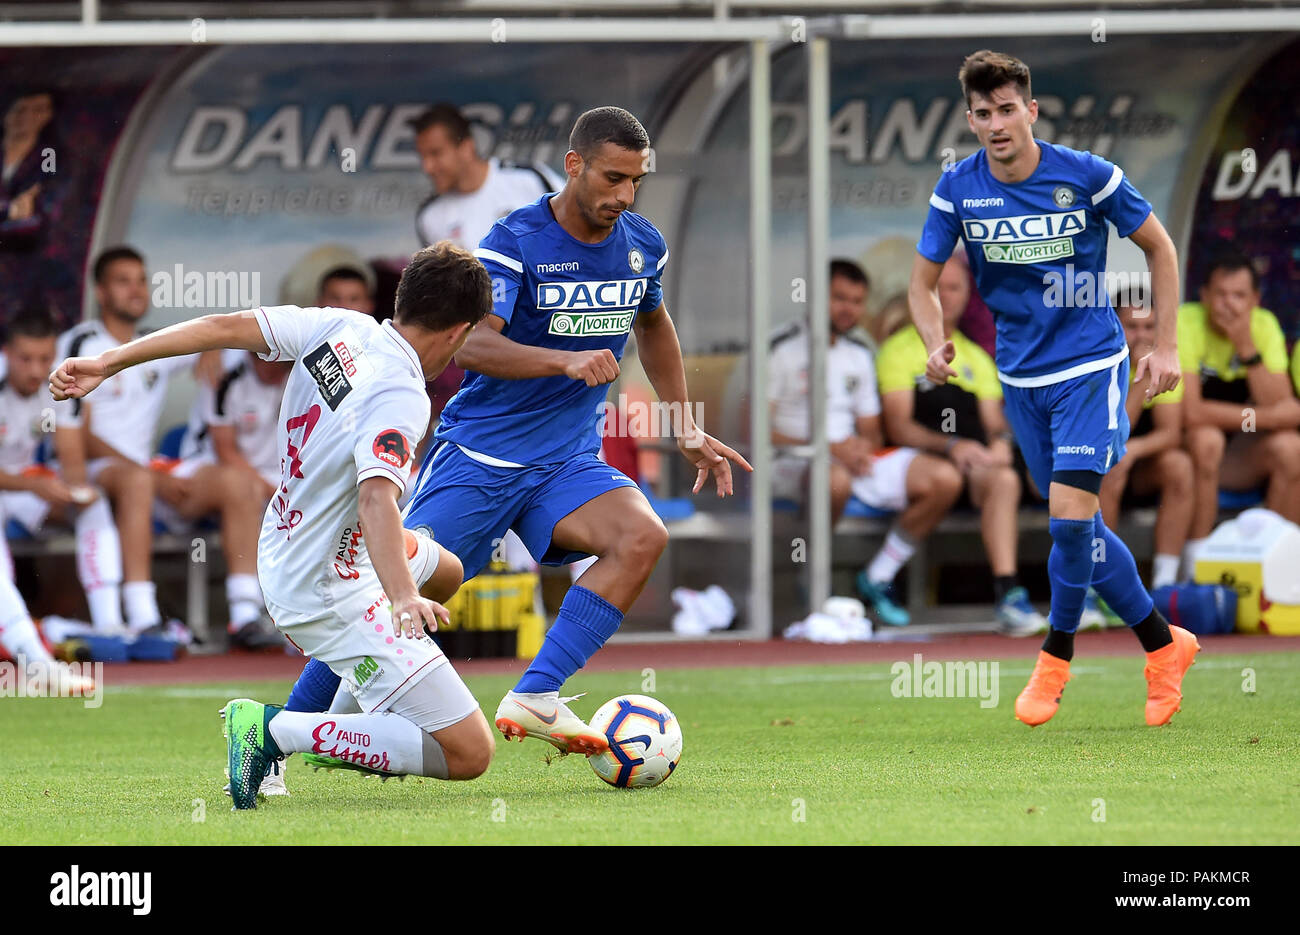 Wolfsberger, Austria, 24 July 2018. Udinese's Al“ Adnan controls the ball during the pre season friendly football match between RZ Pellets WAC and Udinese Calcio at Lavanttal Arena. photo Simone Ferraro / Alamy Live News Stock Photo